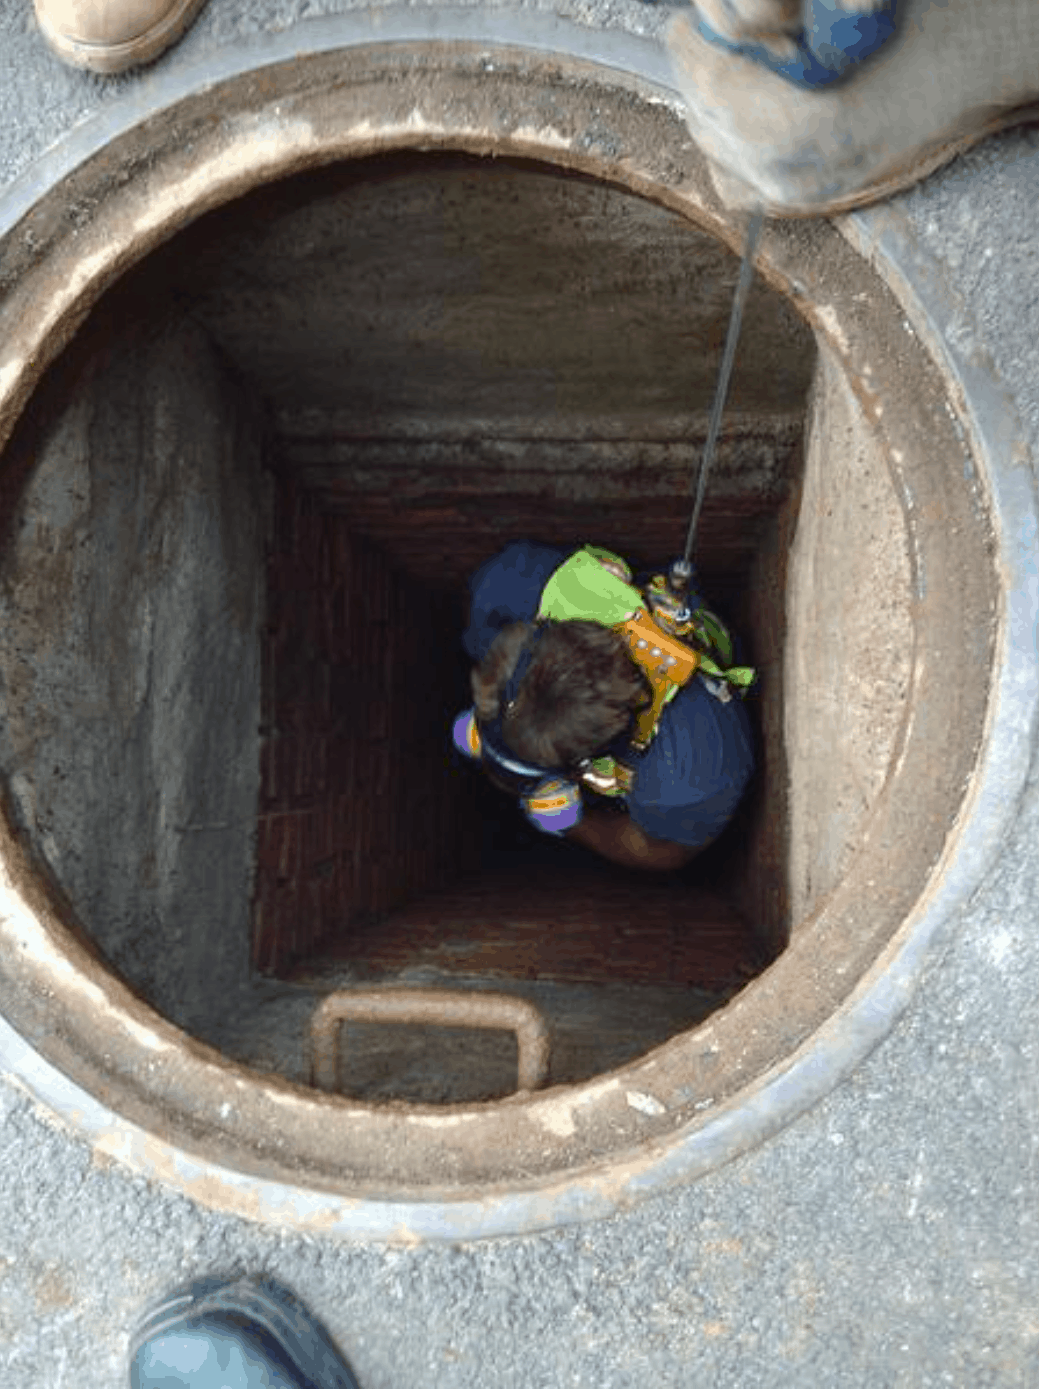 worker descending into sewer near Albertson, NY